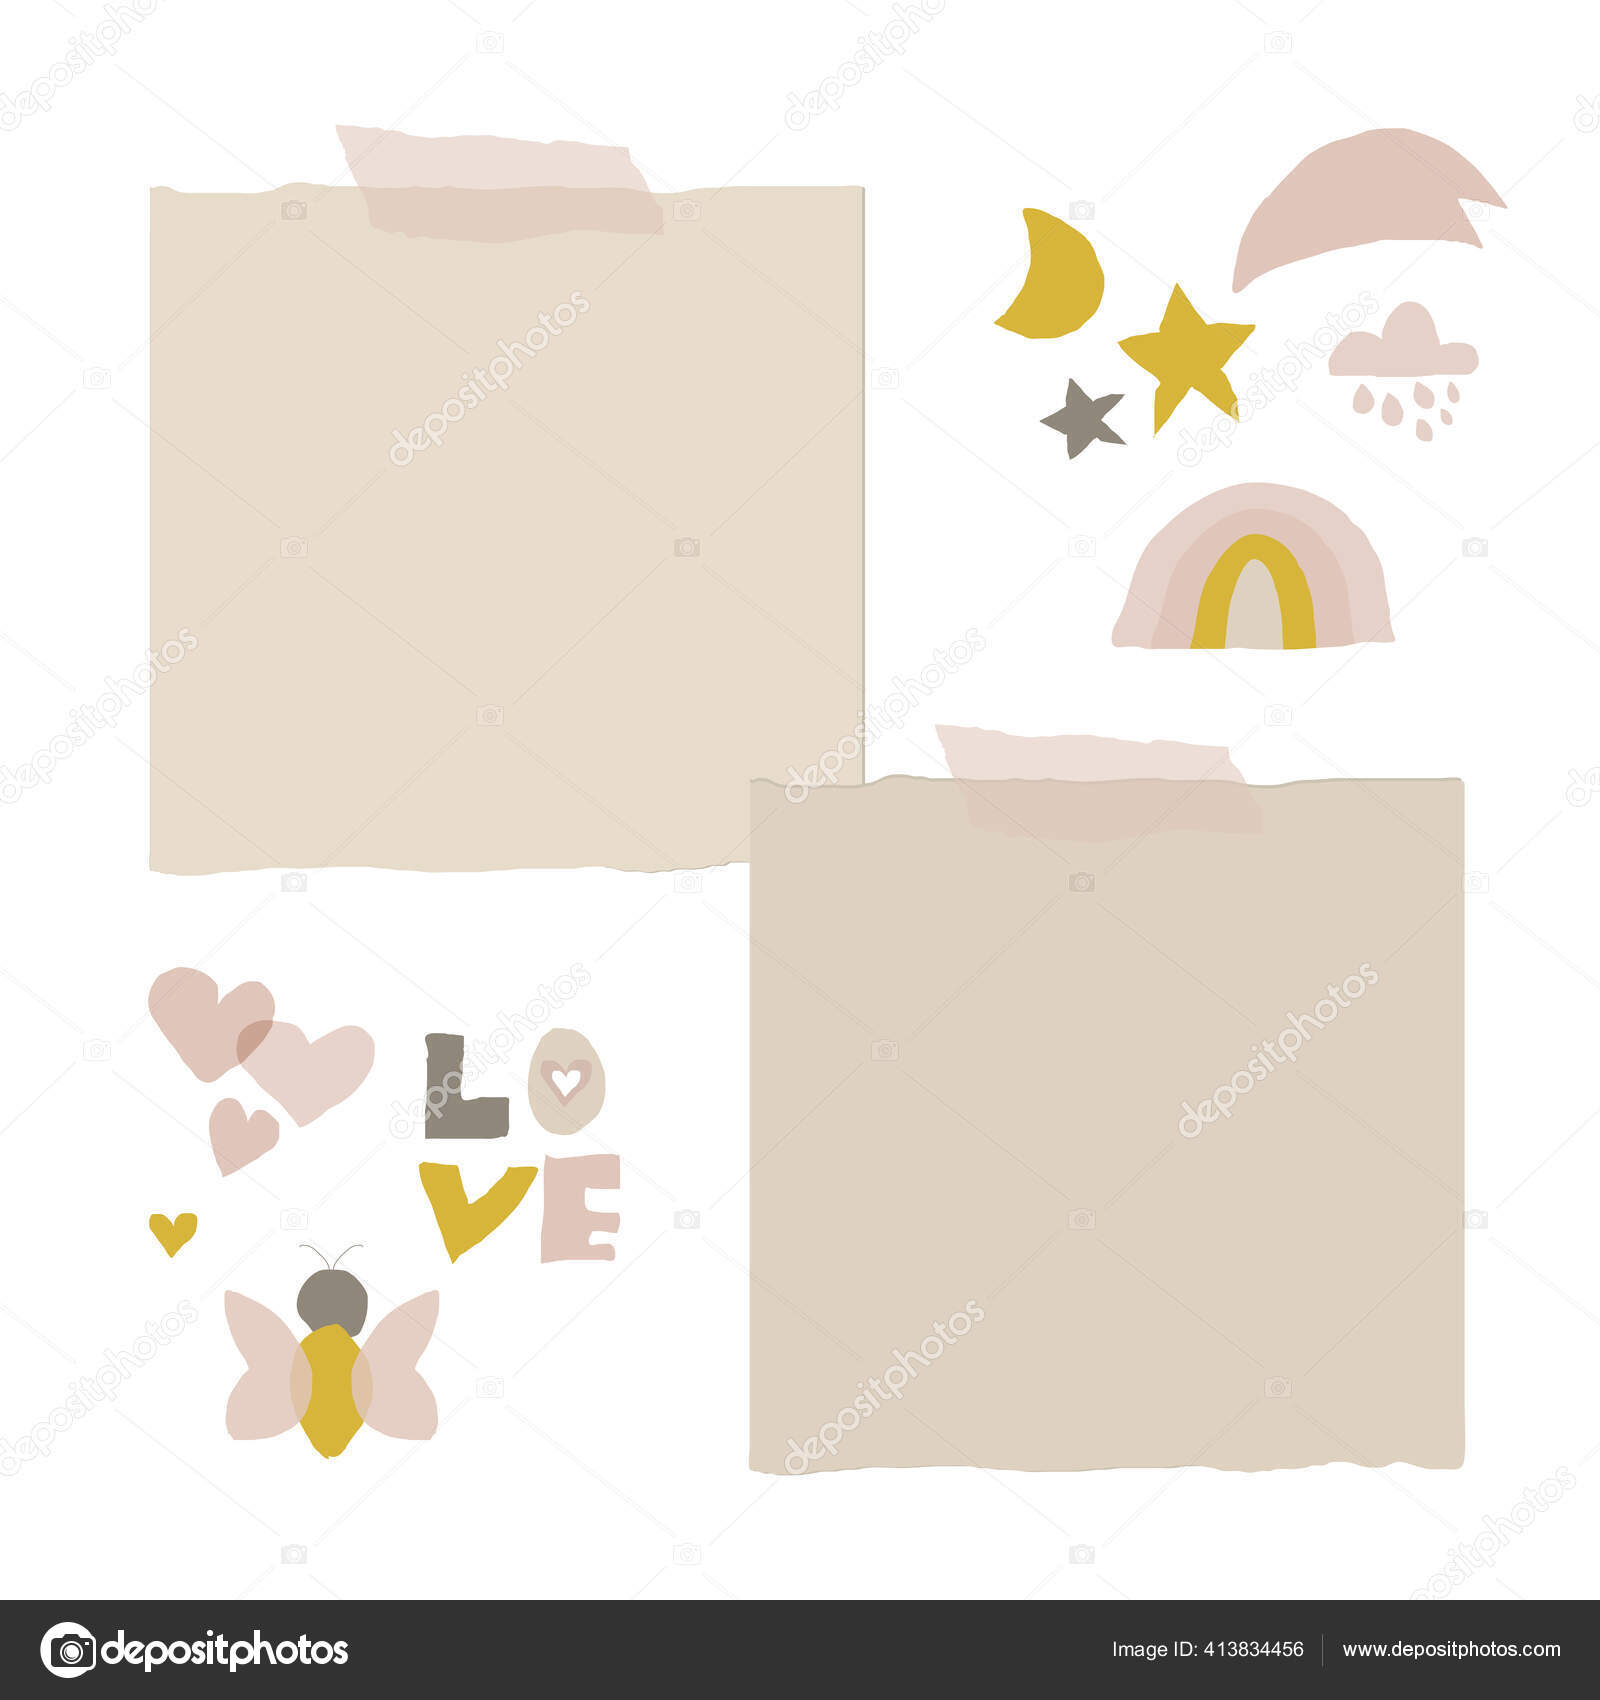 Frames envelopes and stickers for scrapbooking Vector Image